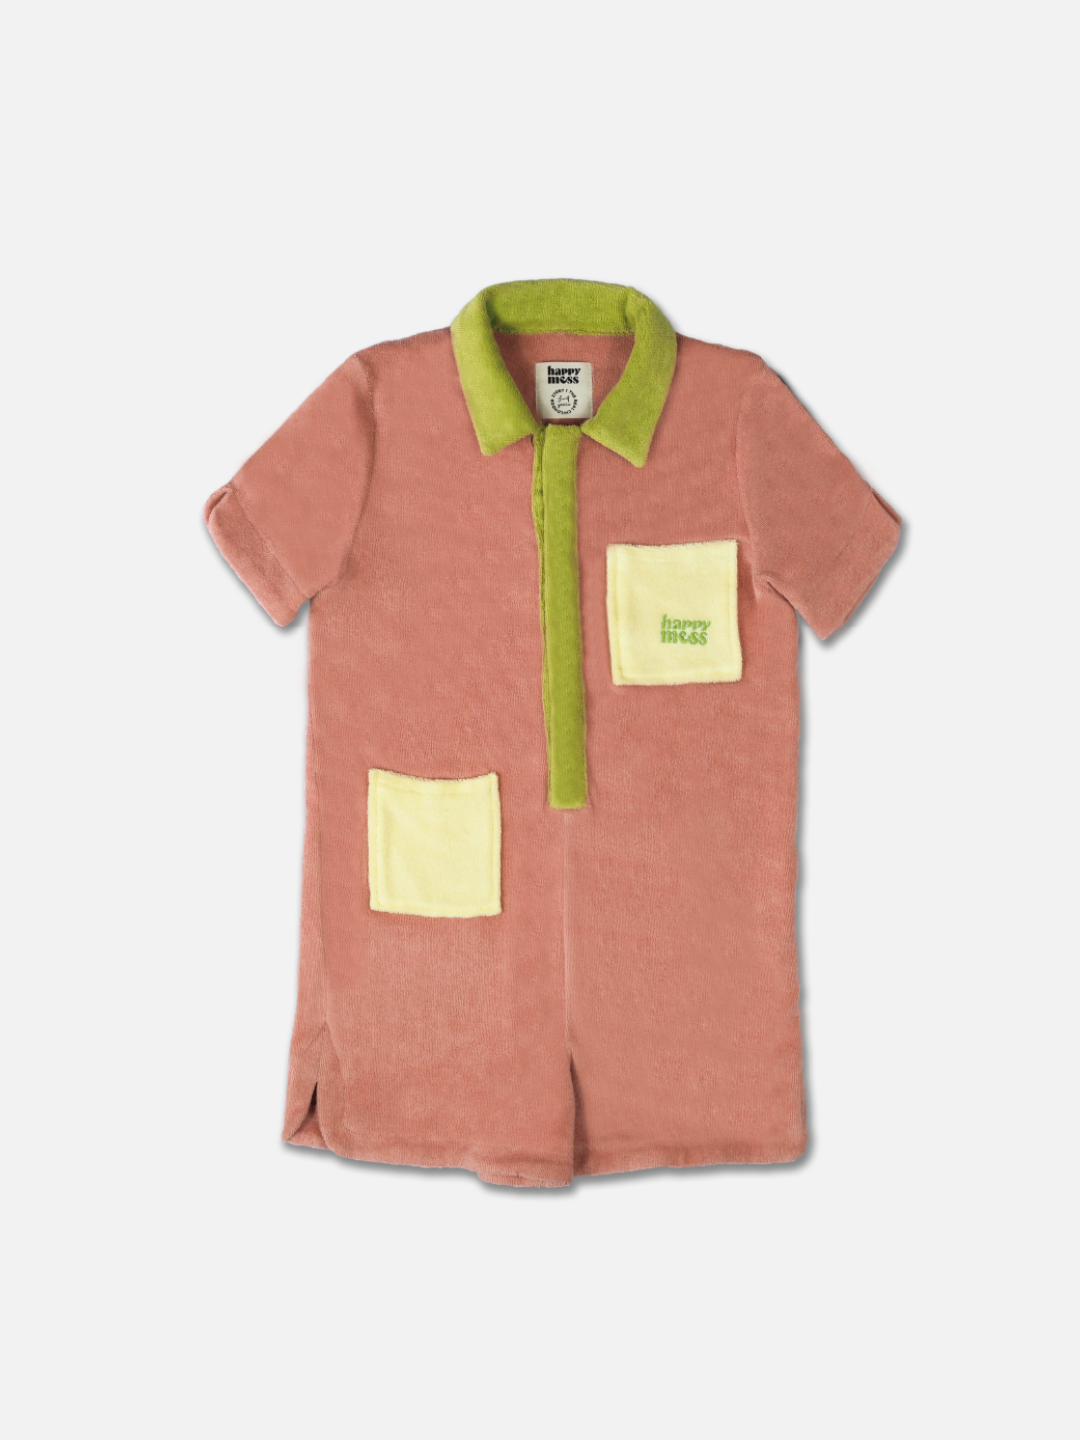 A kids' jumpsuit in peach with lime green collar and placket, and two yellow pockets